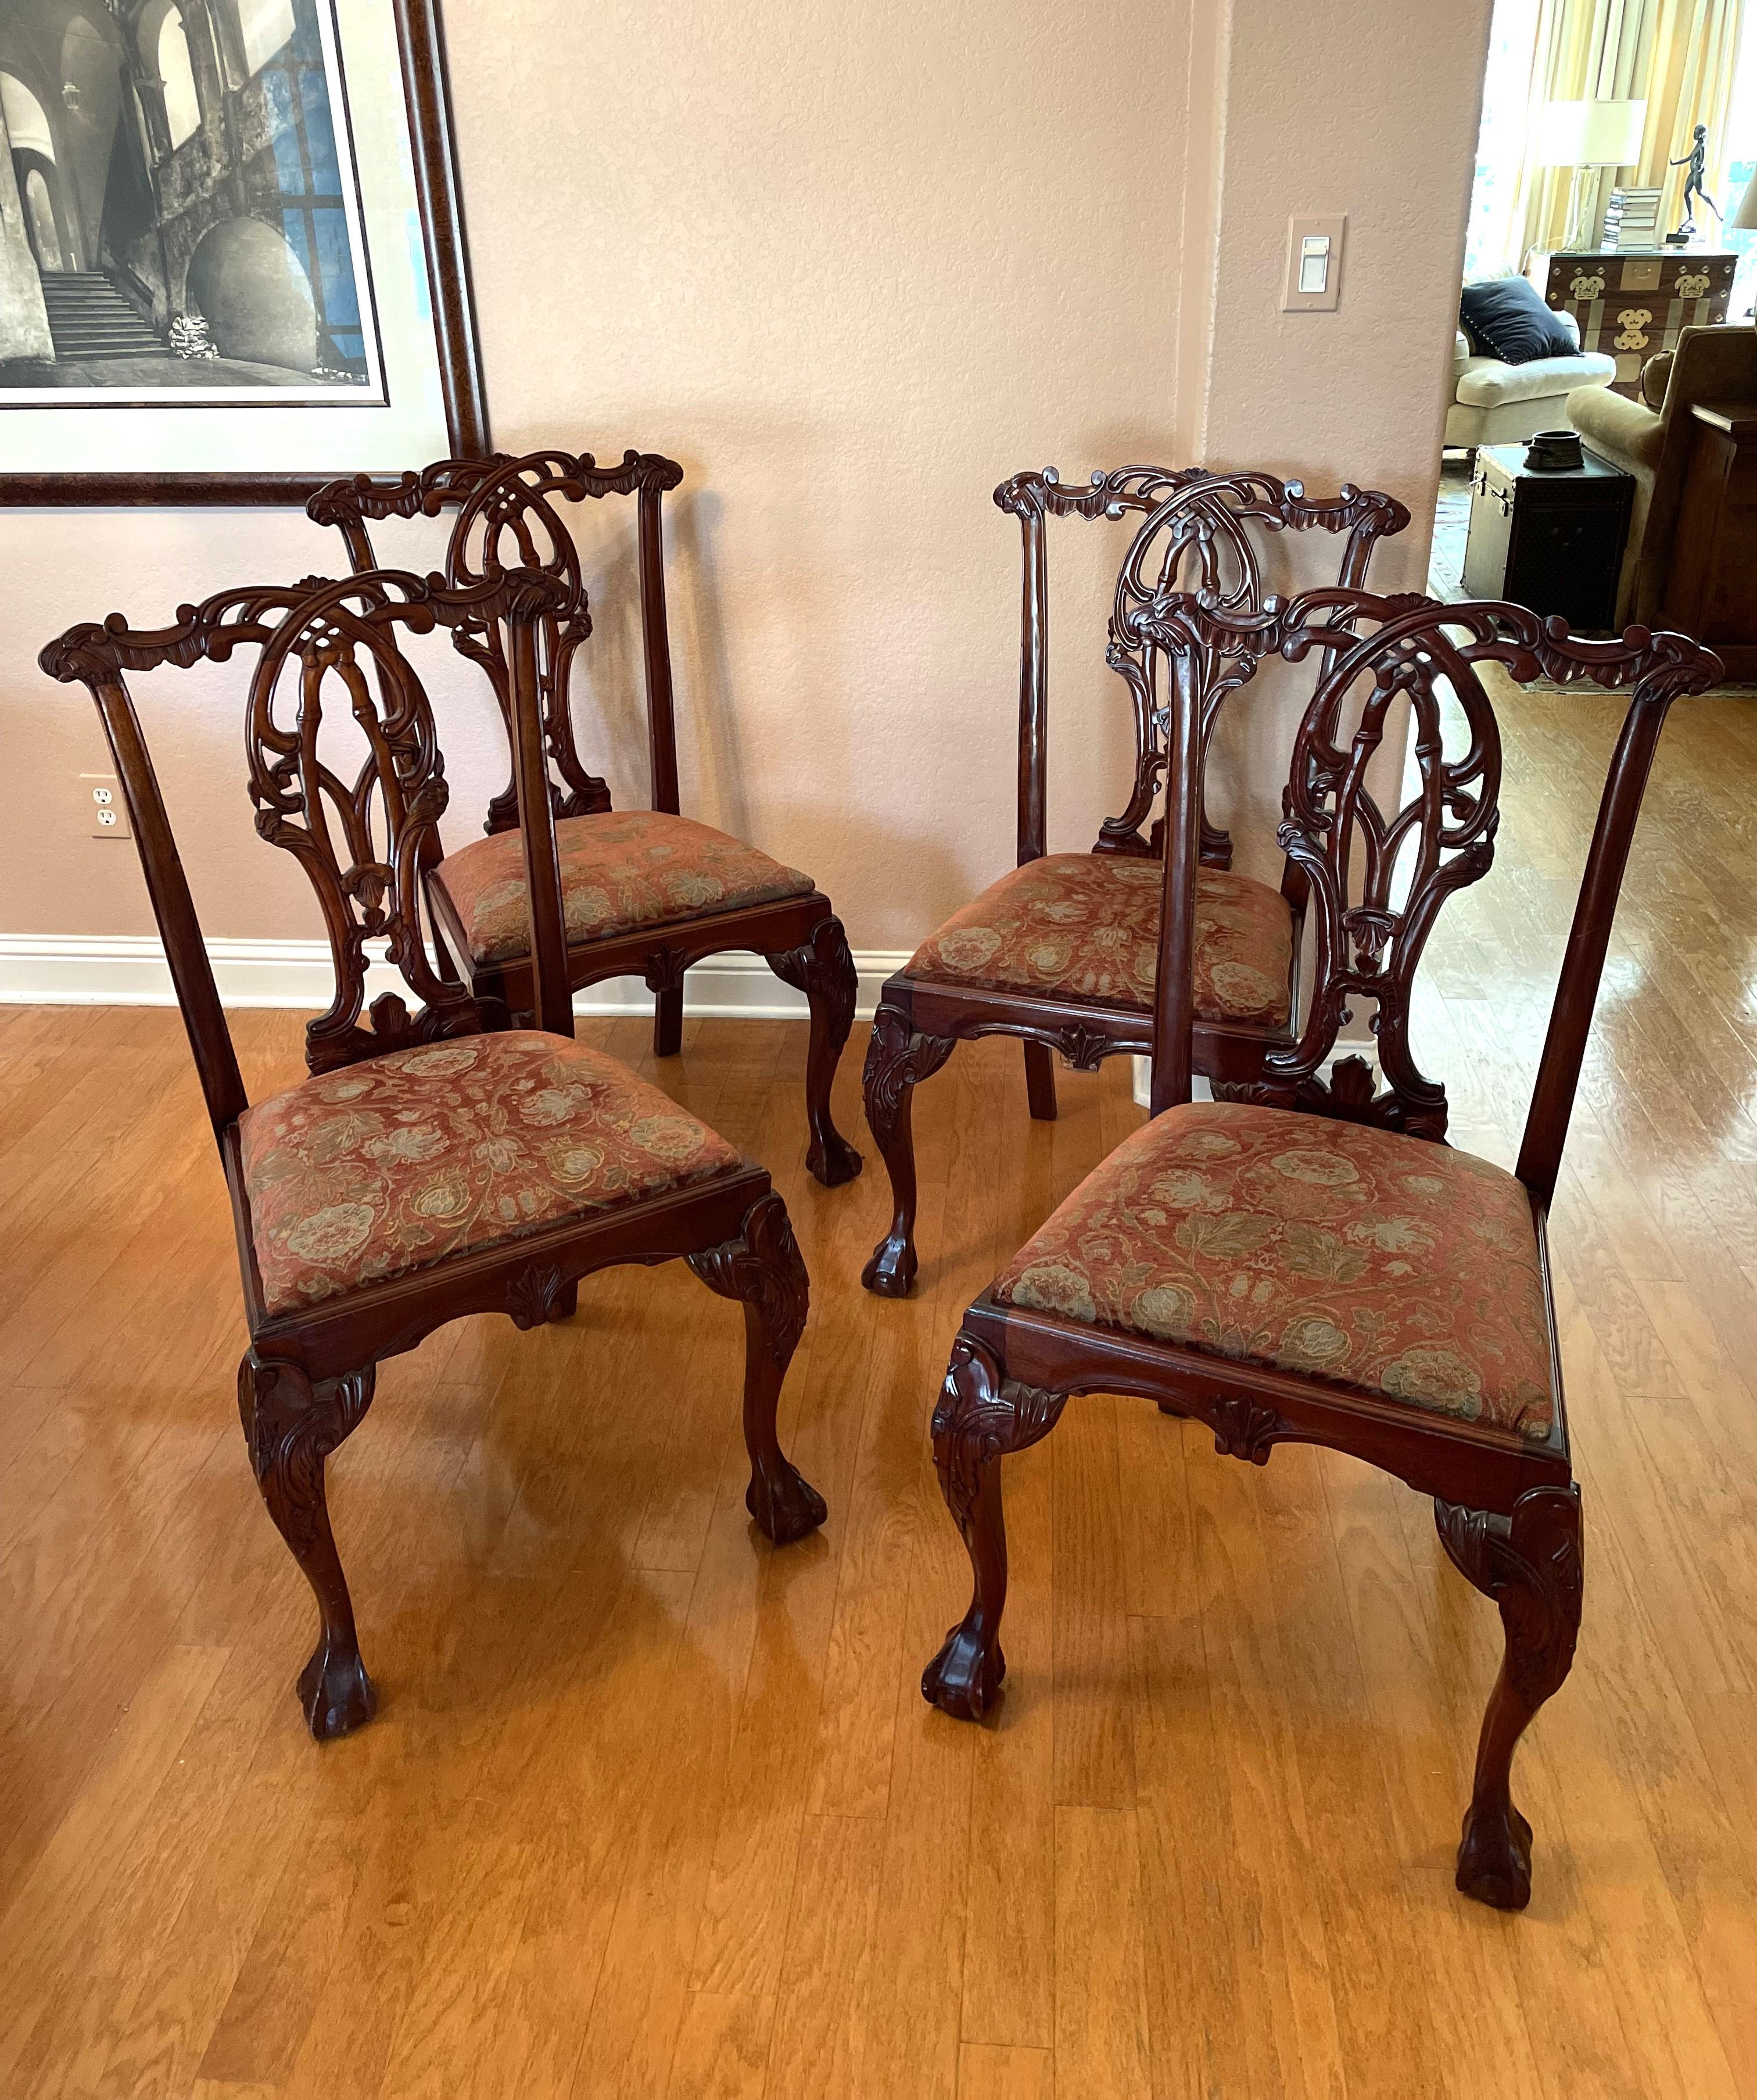 A strikingly graceful set of 4 solid mahogany Chippendale-style dining chairs in excellent condition, with minor imperfections characteristic of age. Also included in the shipment will be two additional upholstered seats, useful given that the